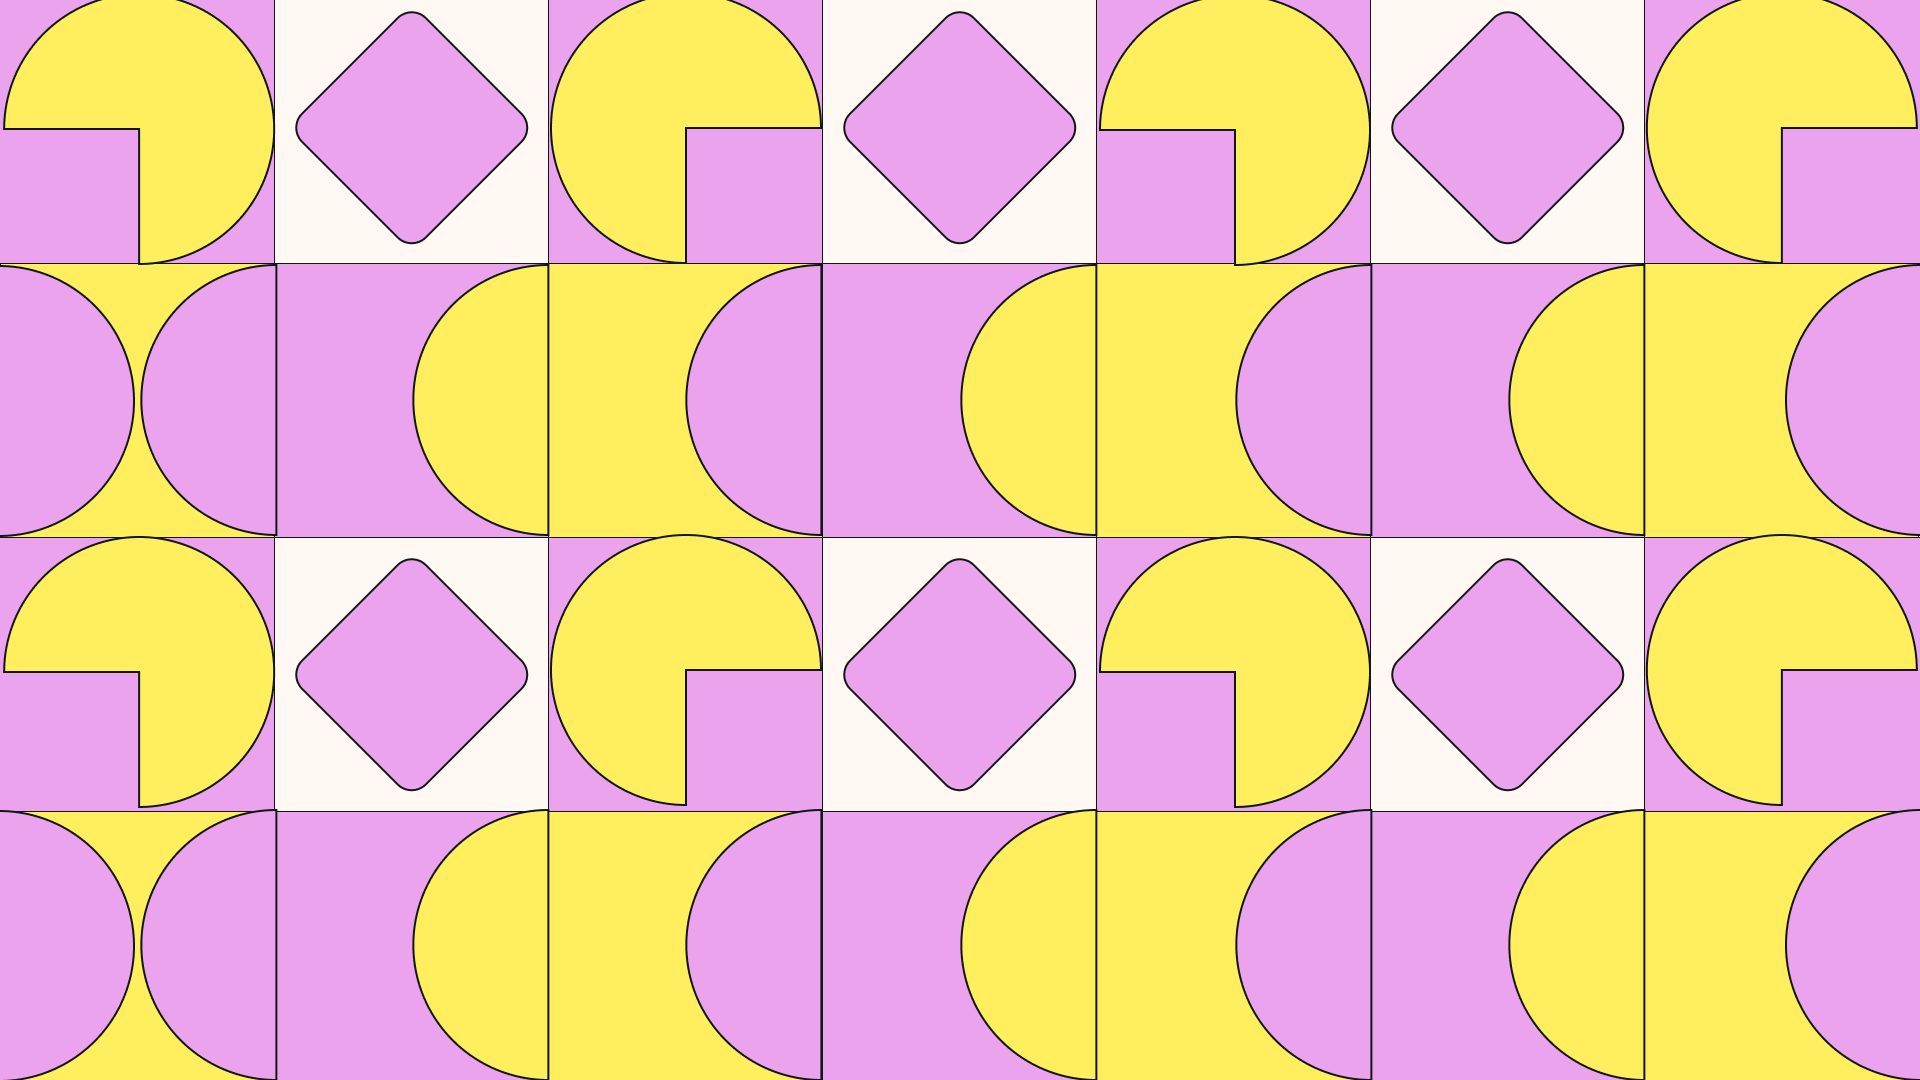 https://www.linearity.io/blog/content/images/2023/10/geometric-patterns-3.png